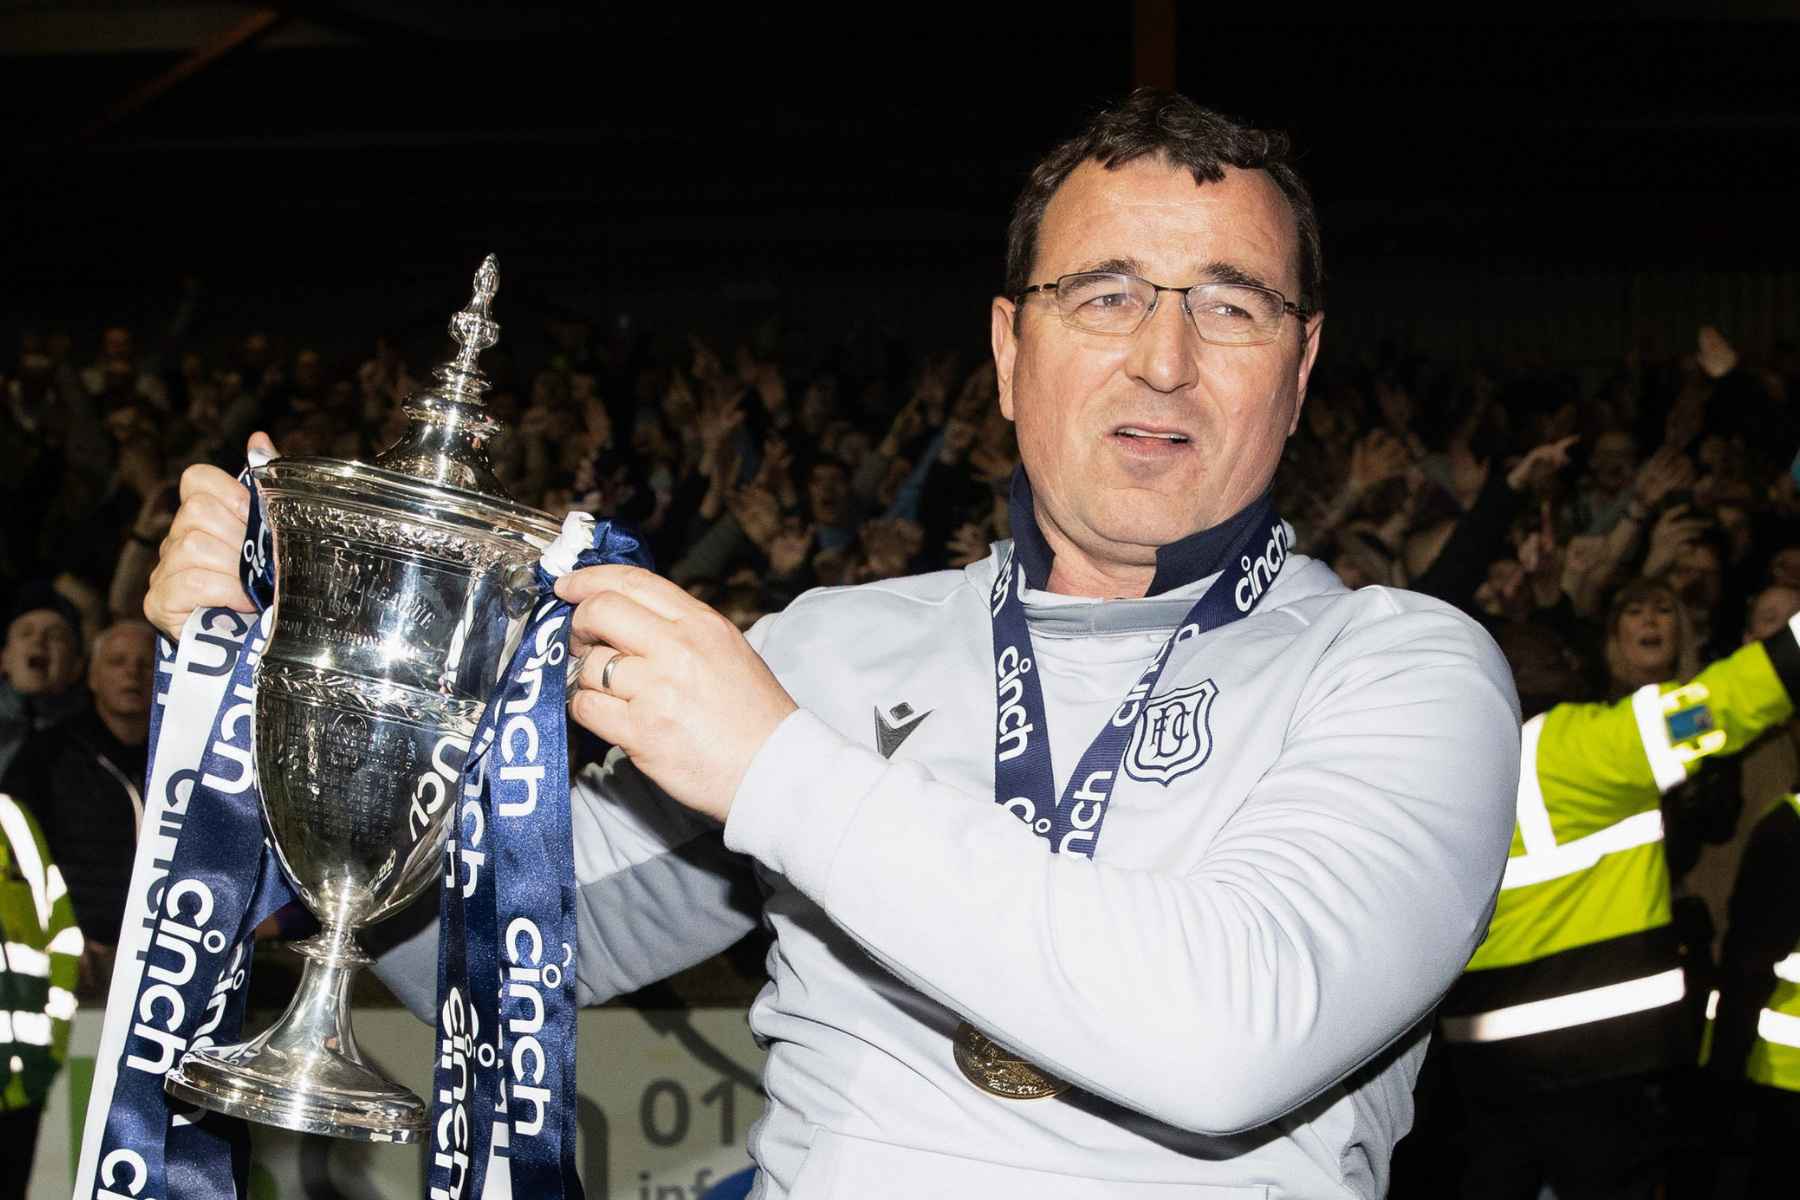 Dundee confirm departure of manager Gary Bowyer days after promotion